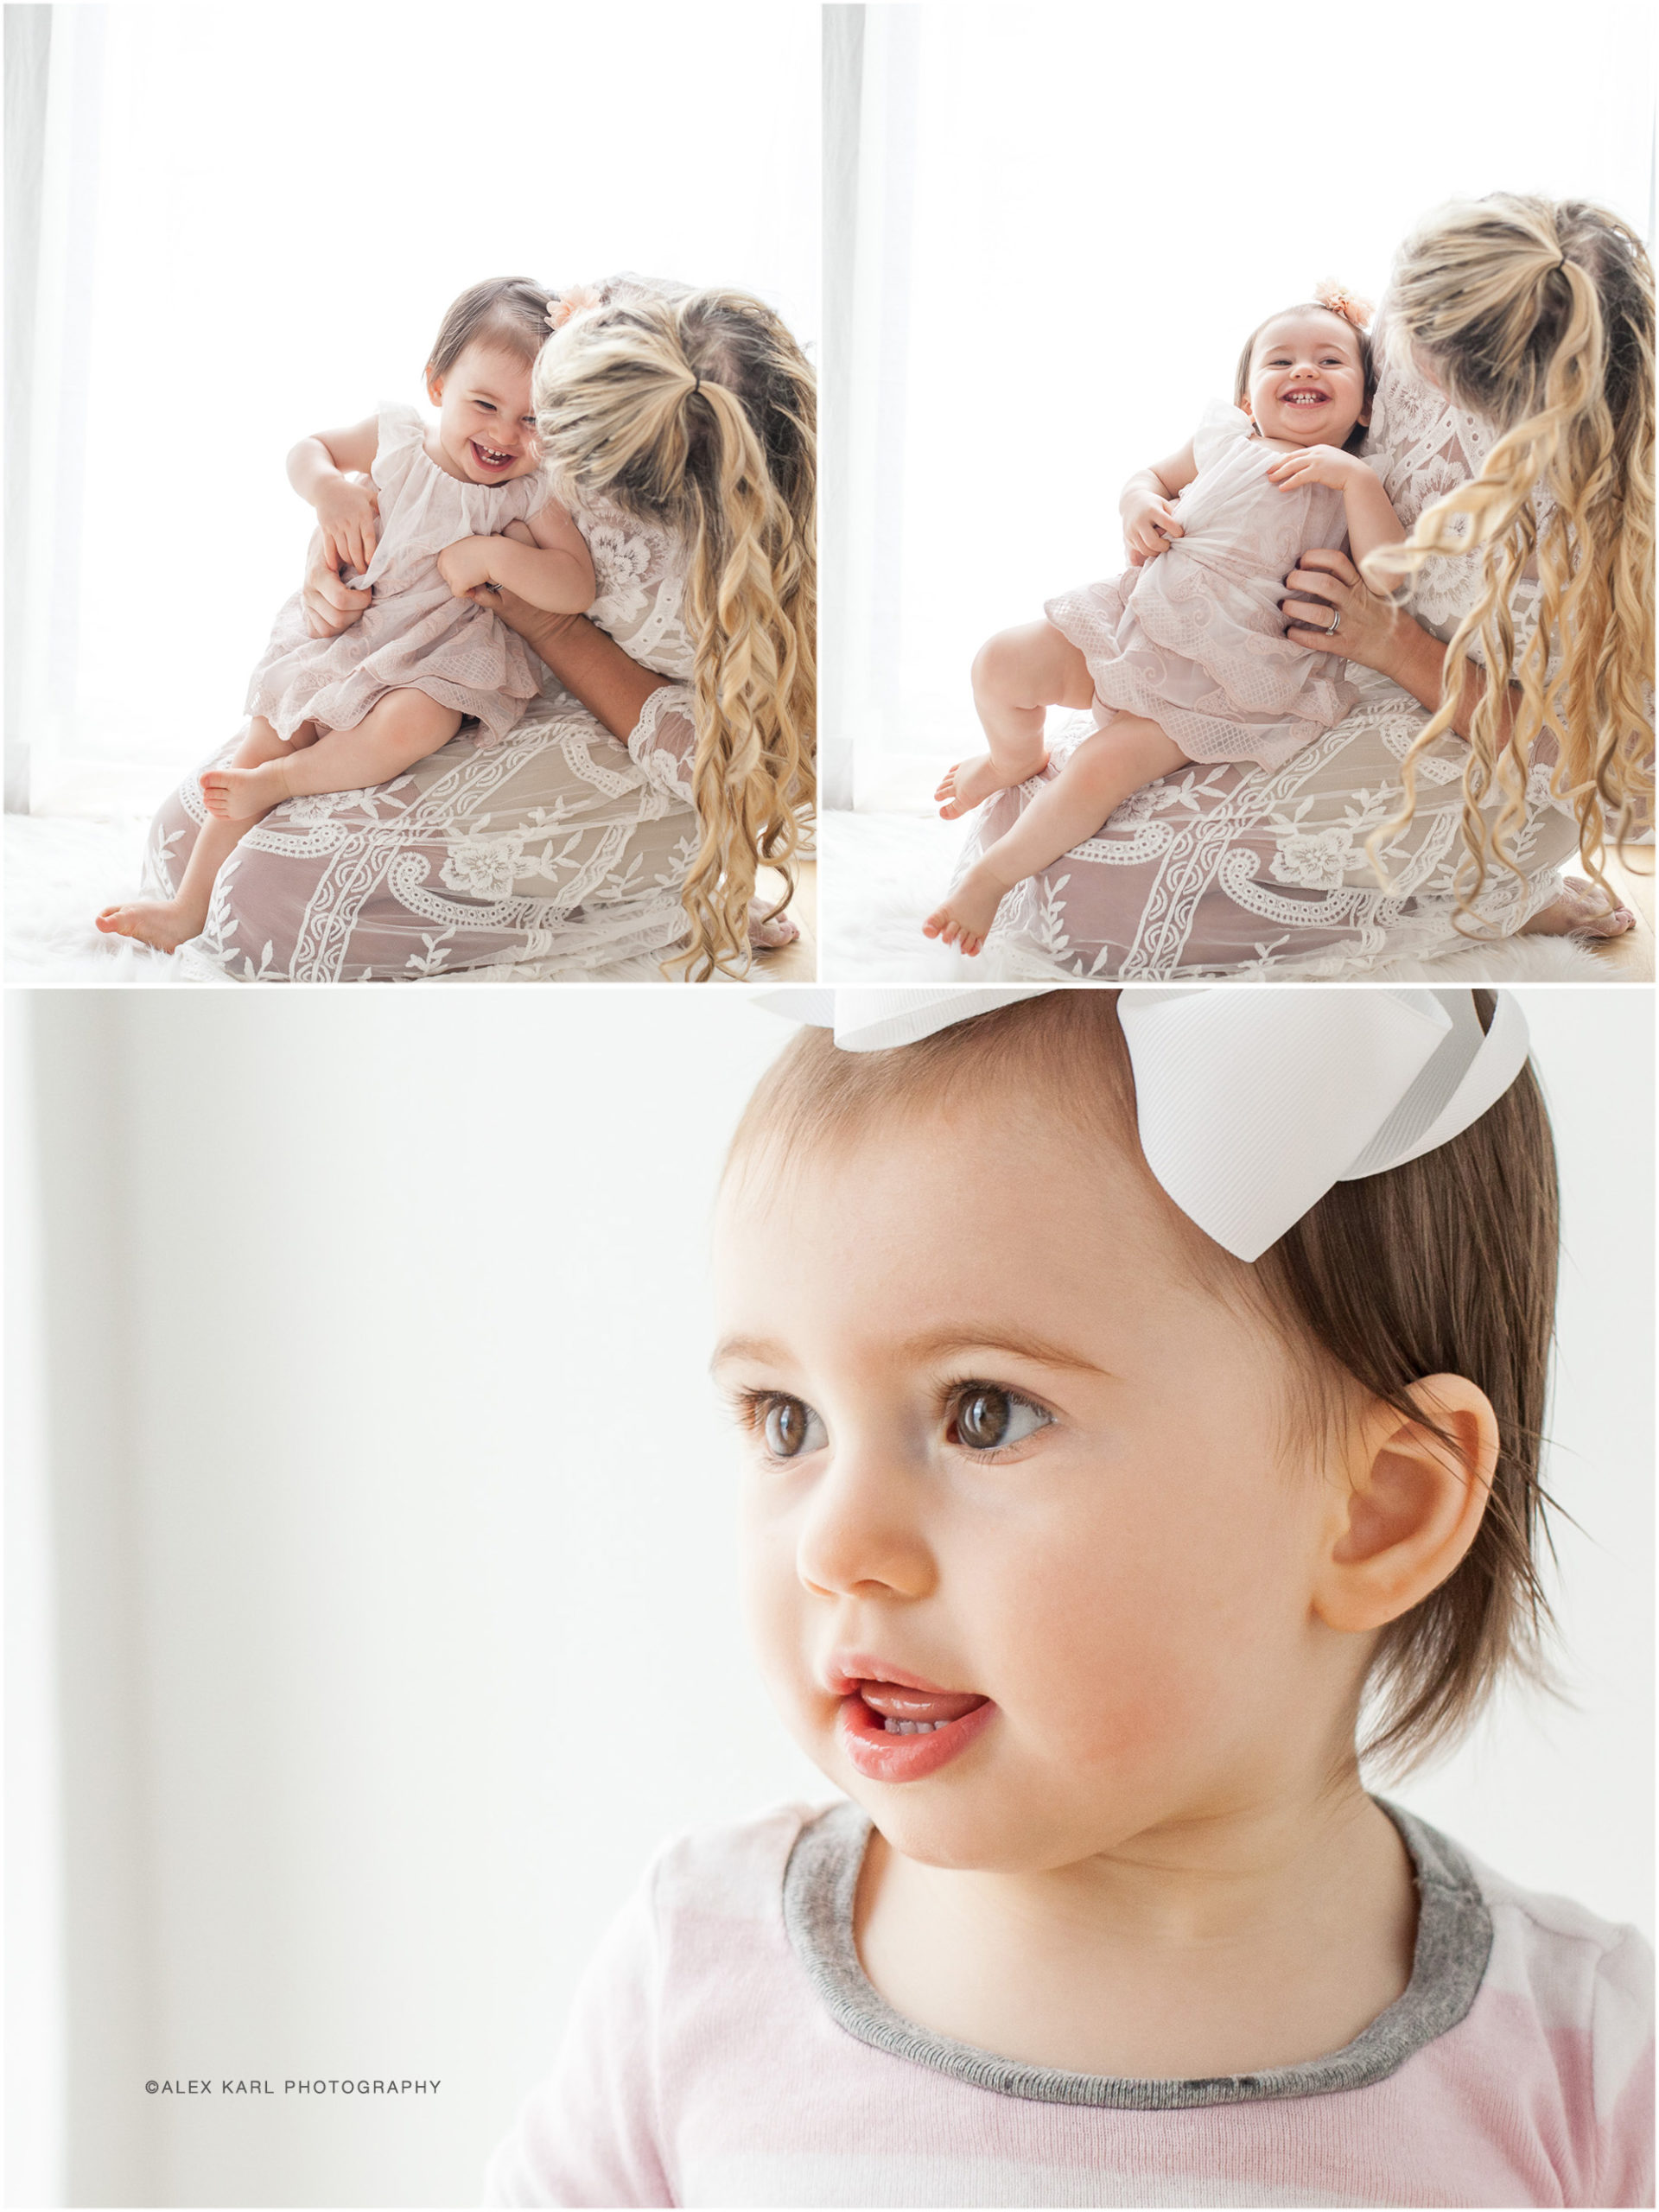 A baby sits with her mother | Alex Karl Photography | Palm Beach Family Photographer